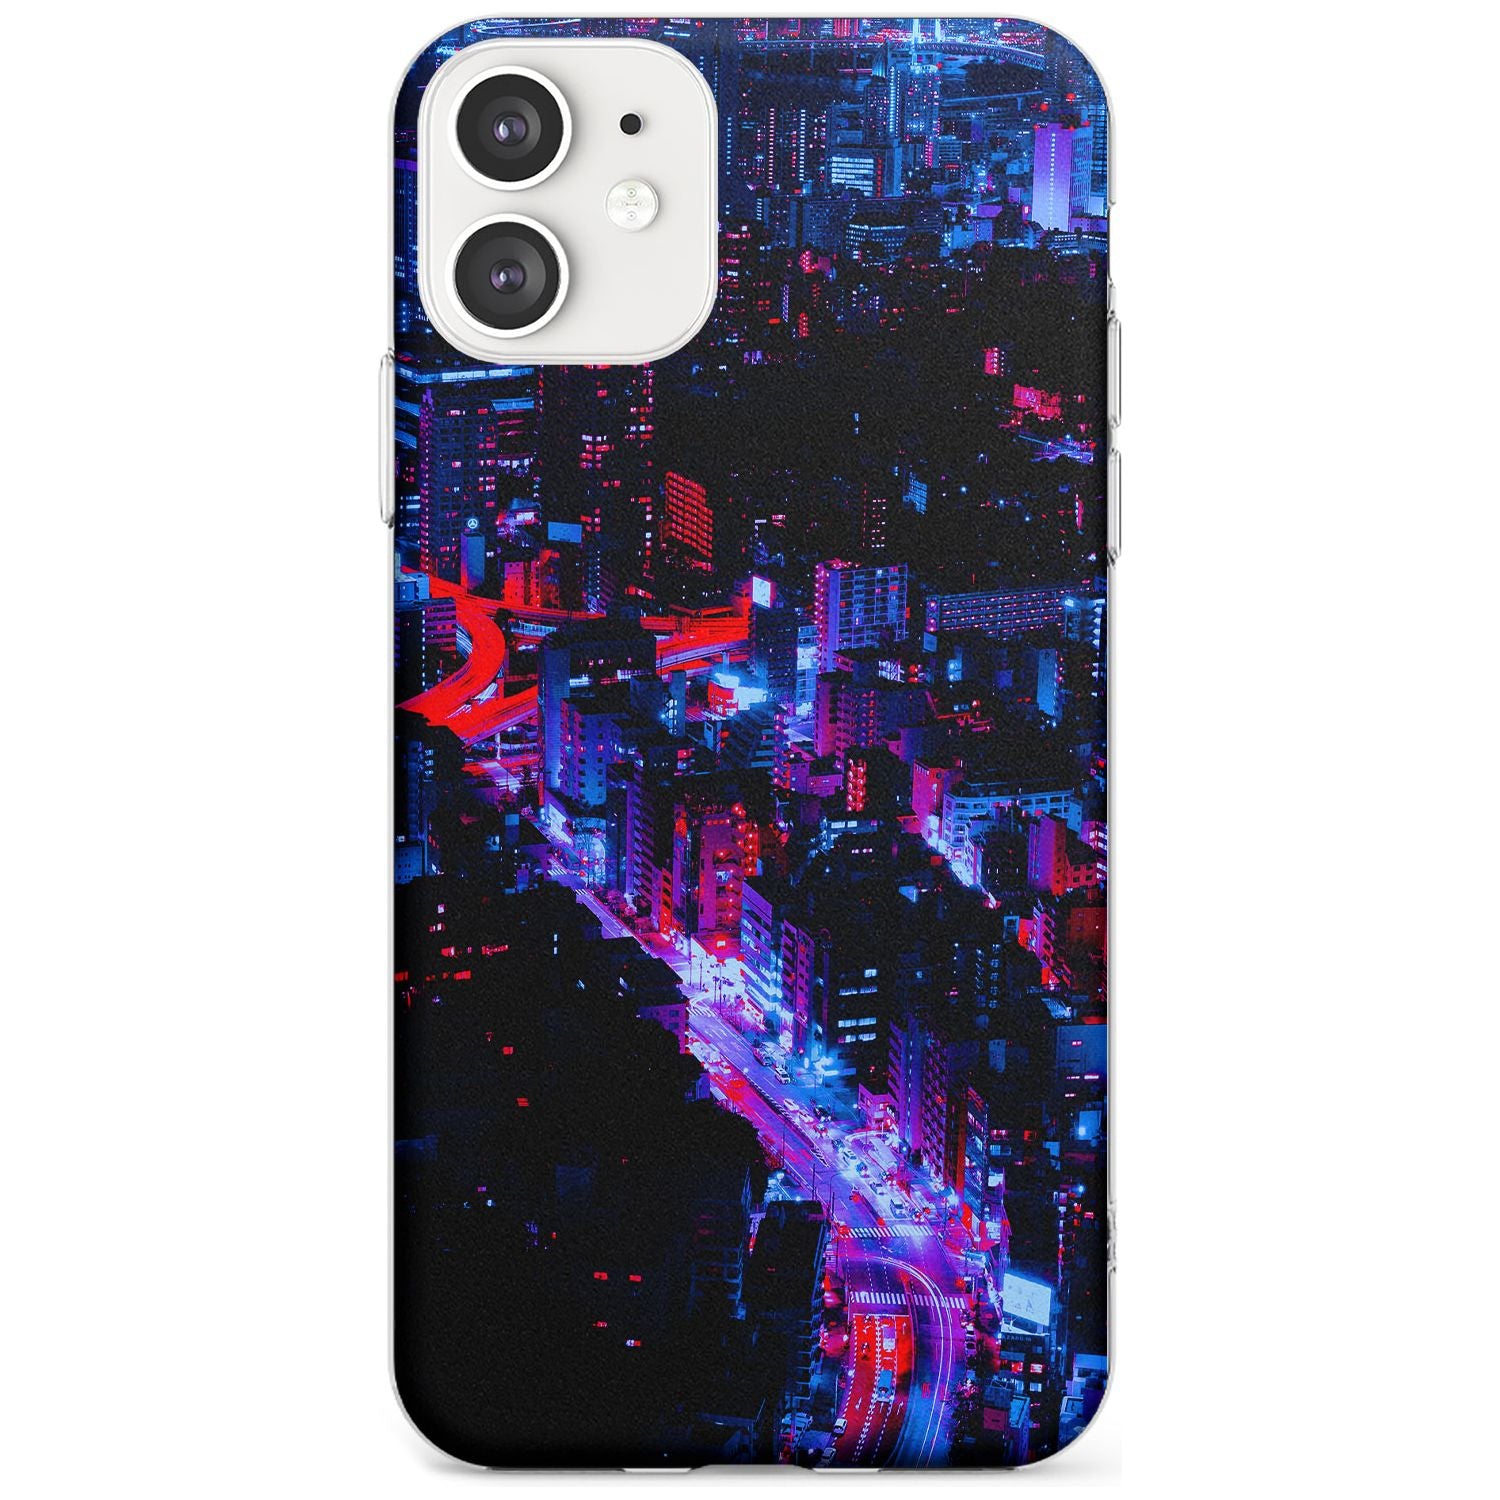 Arial City View - Neon Cities Photographs Slim TPU Phone Case for iPhone 11